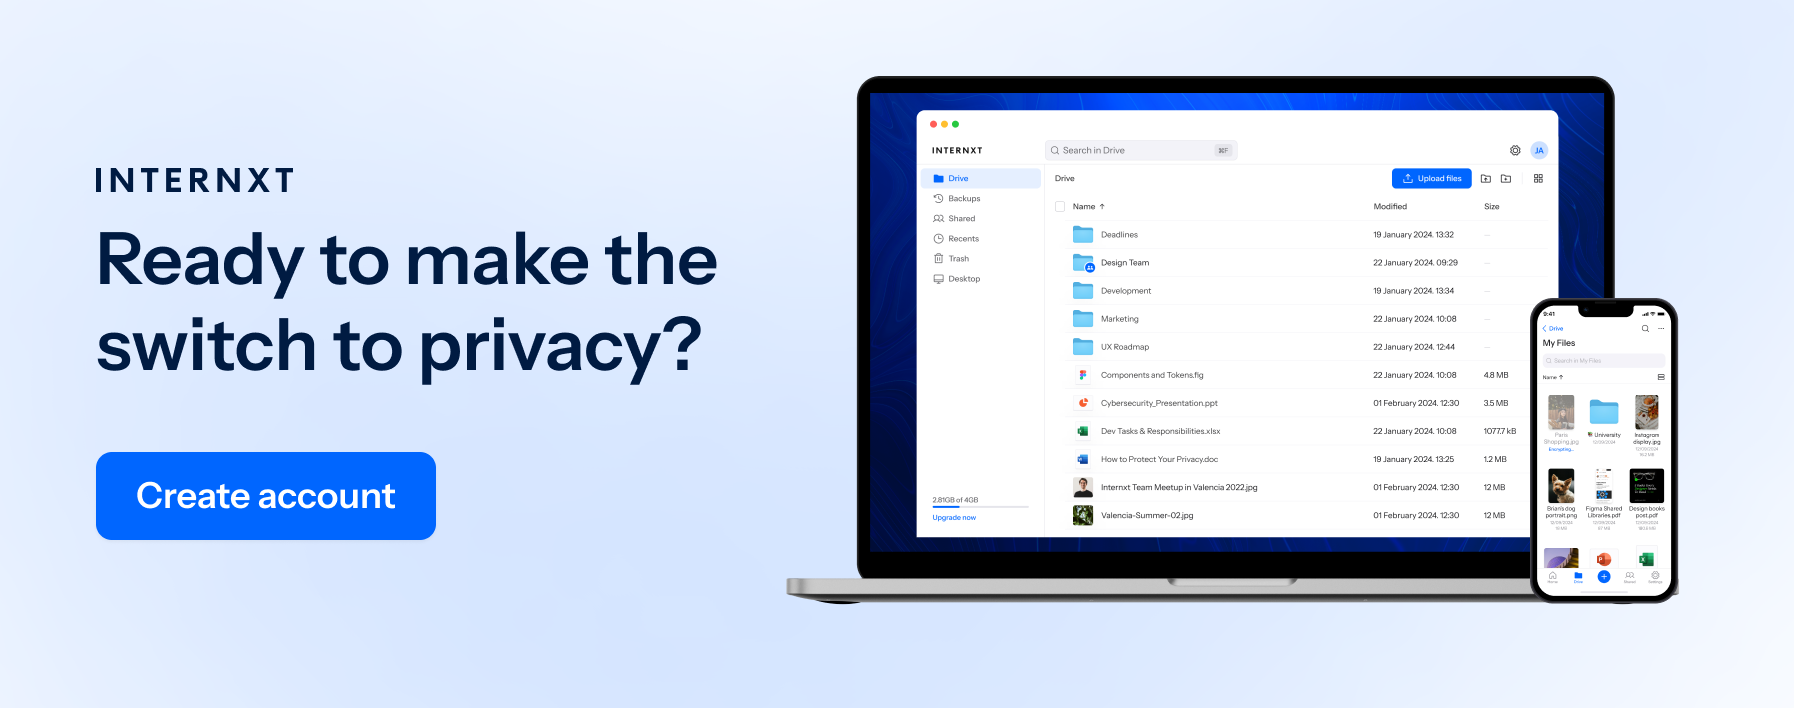 Internxt is a cloud storage service based on encryption and privacy.